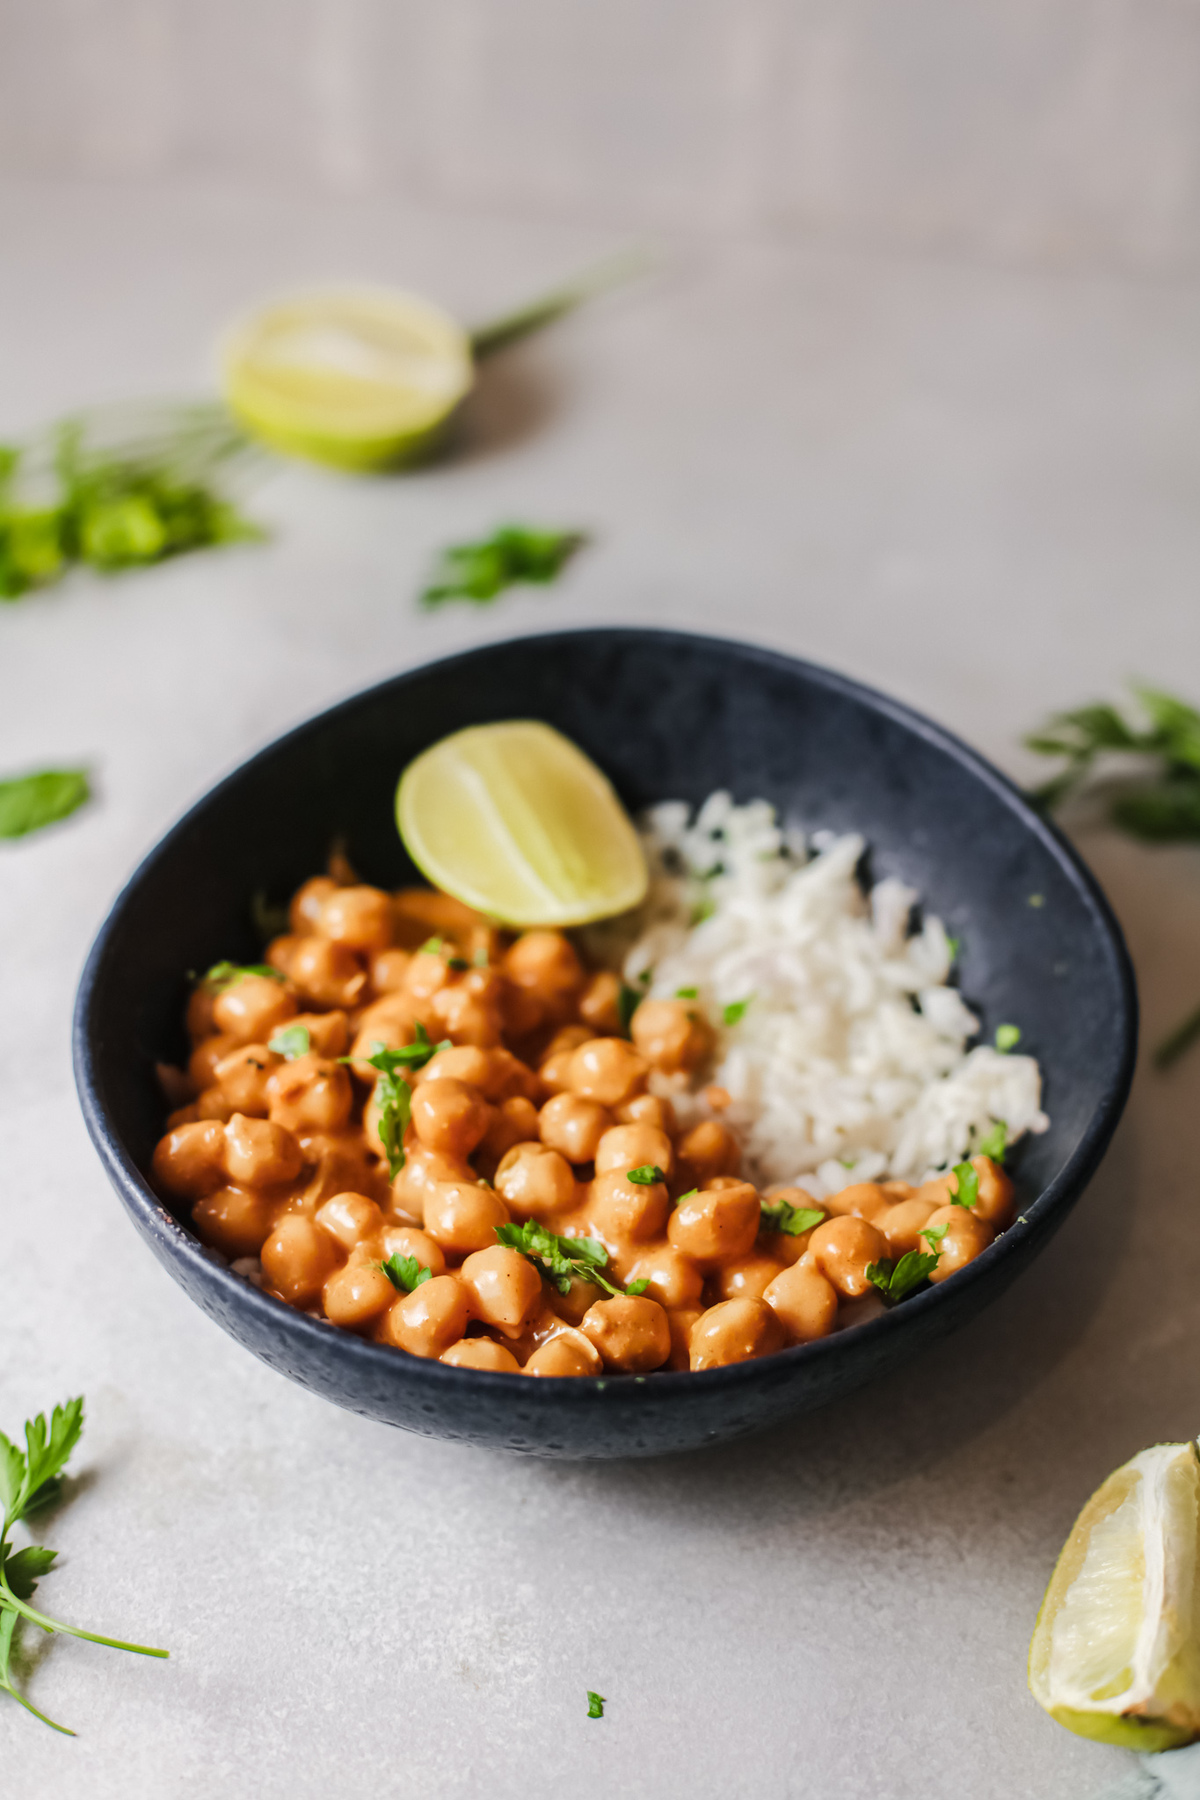 Delicious Indian Butter Chickpeas Recipe - Vegetarian - Just Short of Crazy